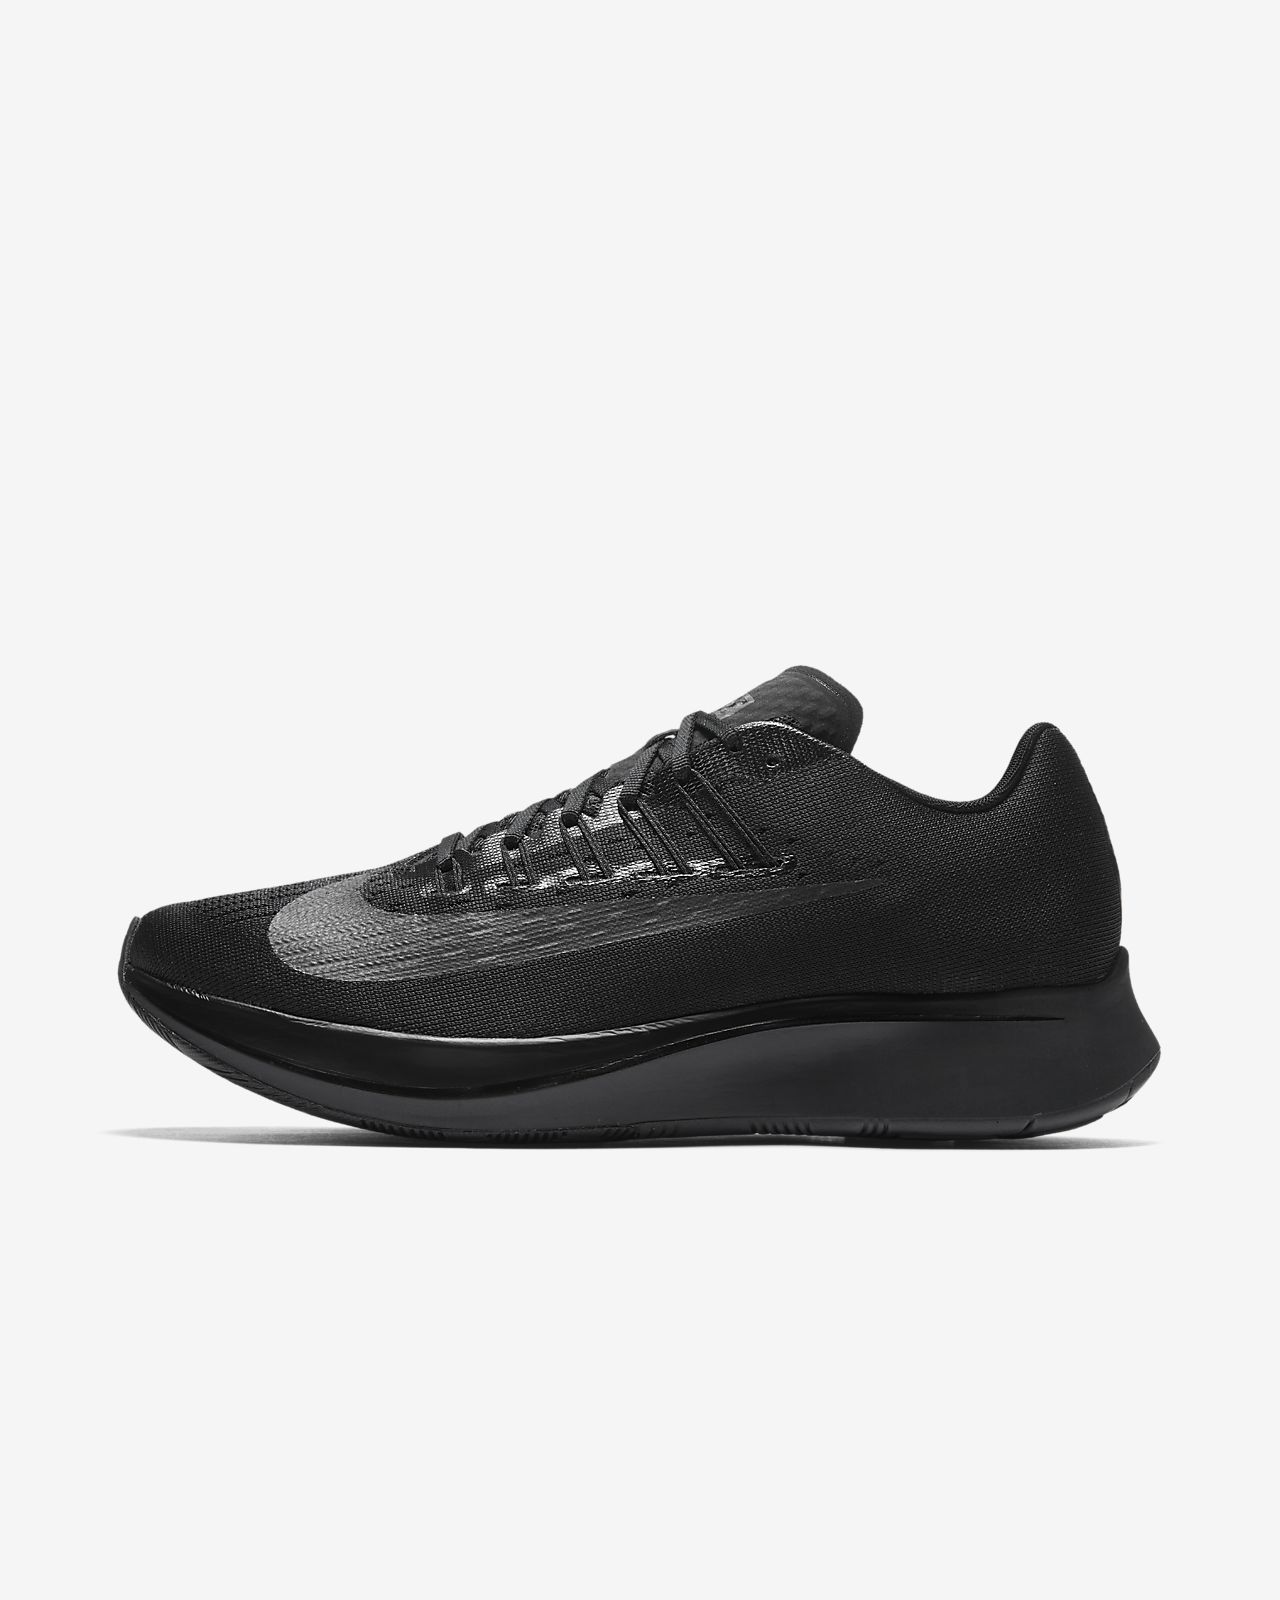 nike vaporfly 4% homme argent